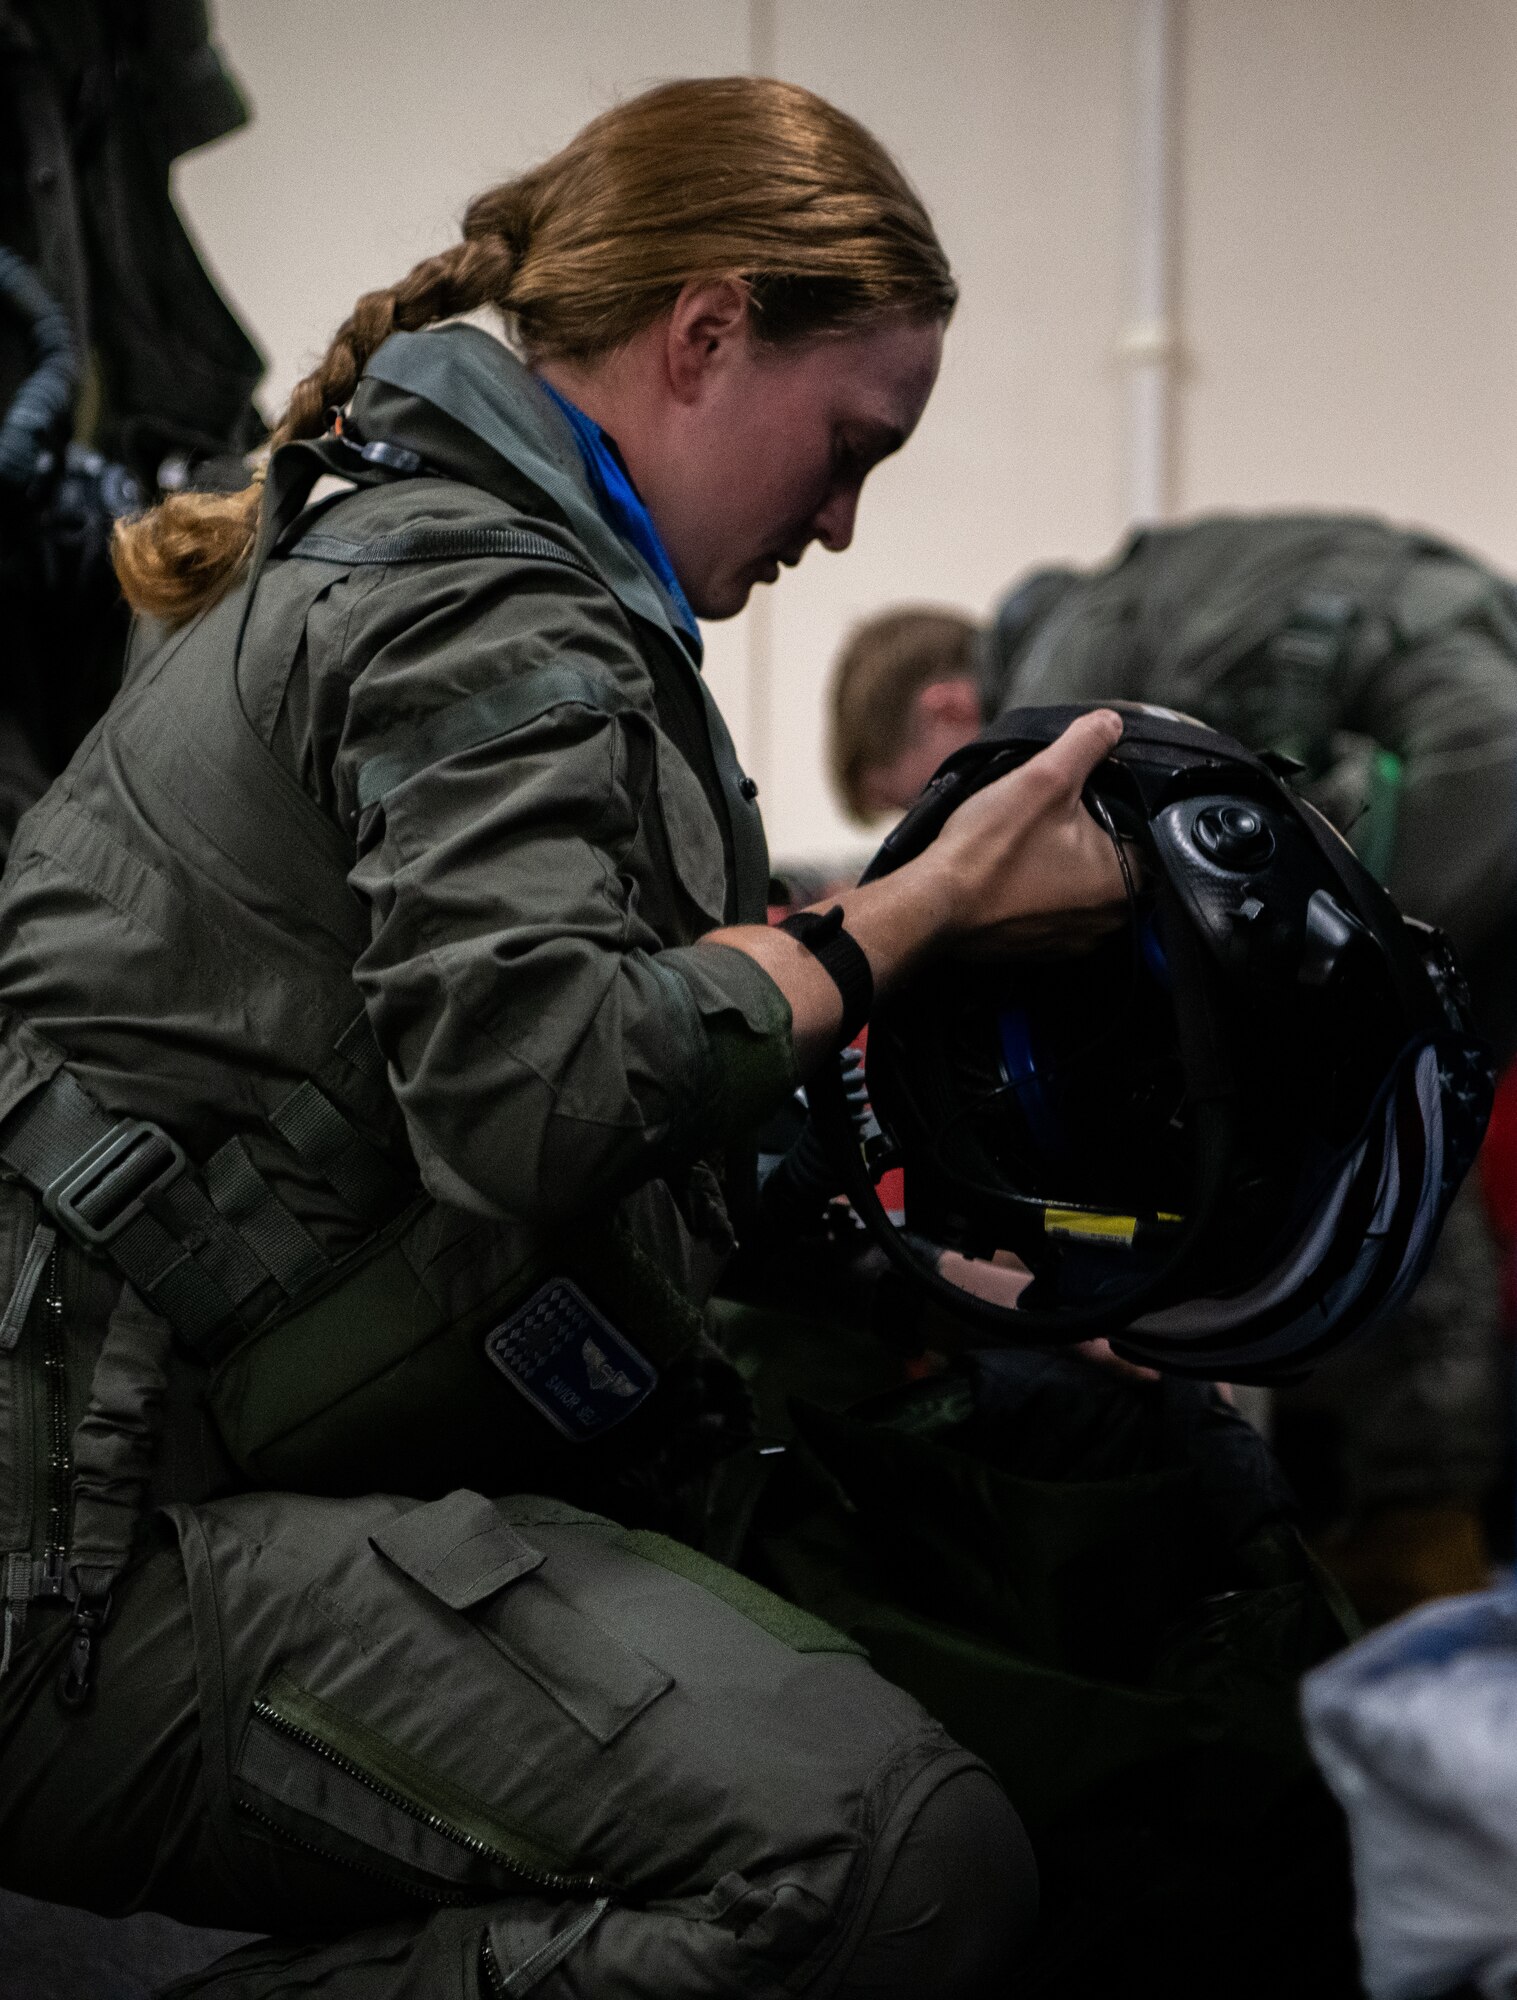 A pilot holds a helmet while conducting pre-flight preparations.